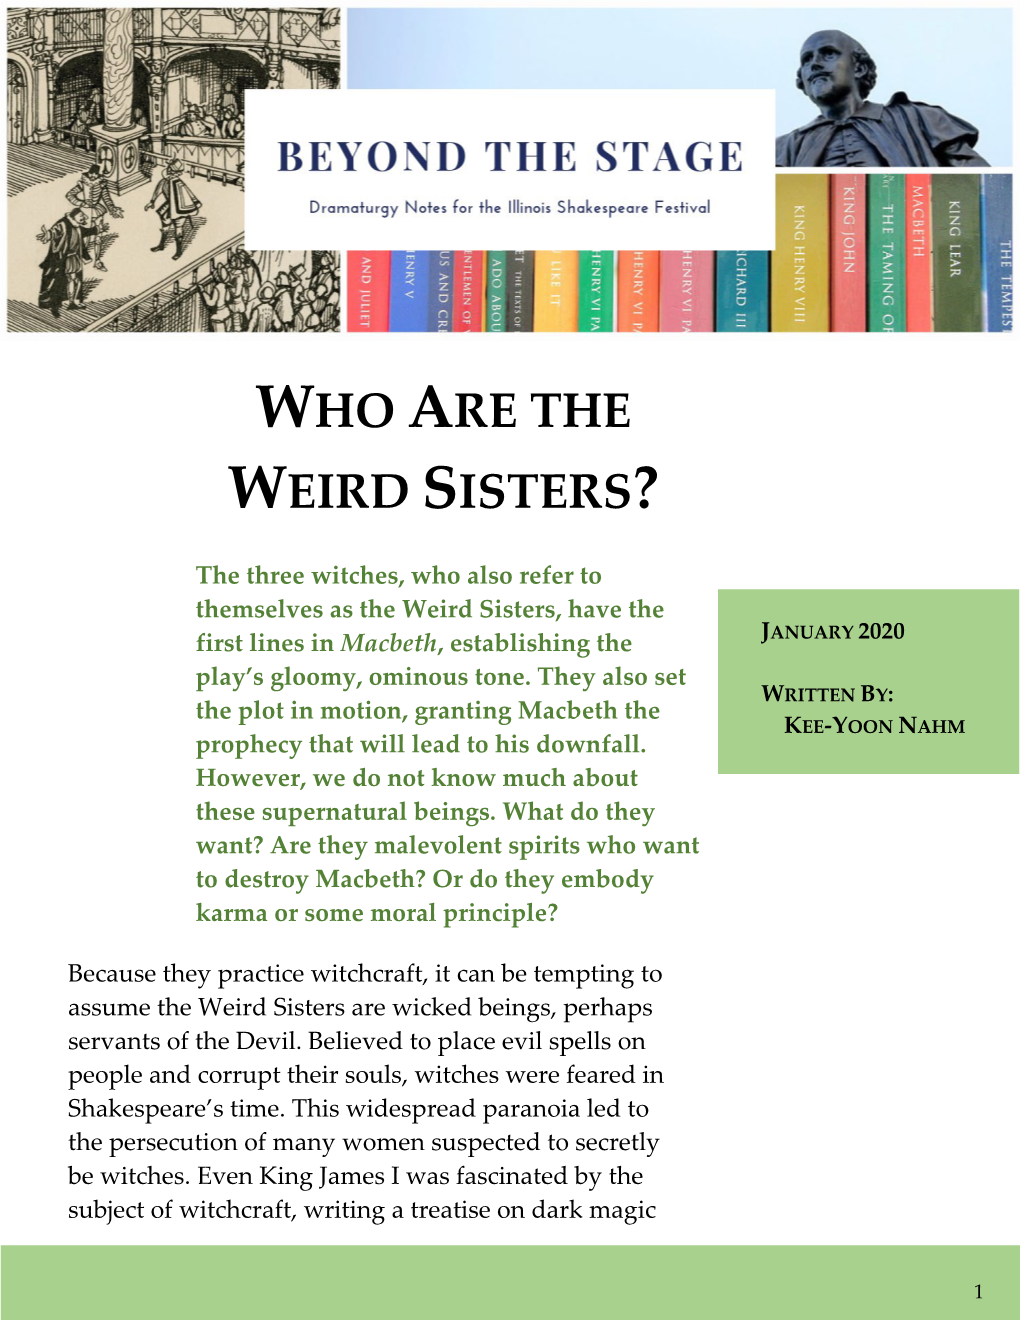 Who Are the Weird Sisters?